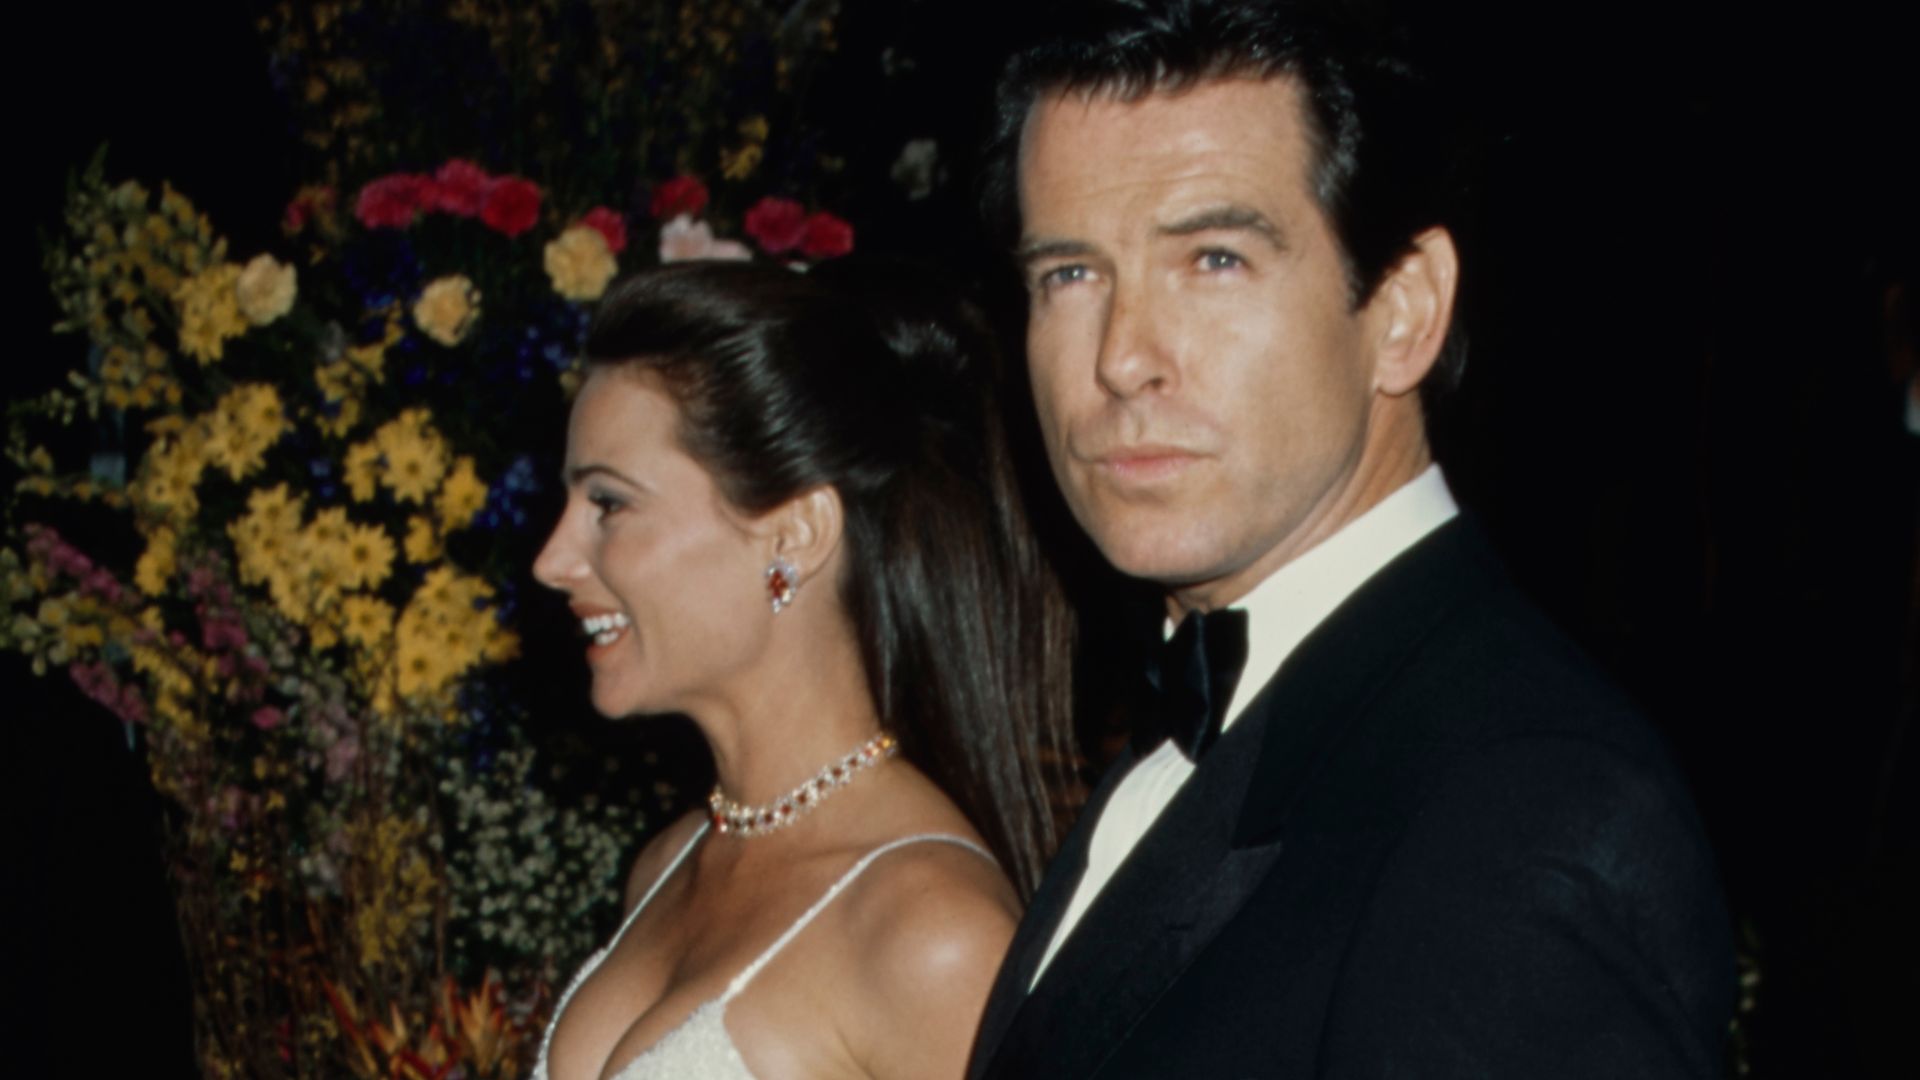 Keely Shaye Smith in a white sparkly dress and Pierce Brosnan in a suit with flowers in the background